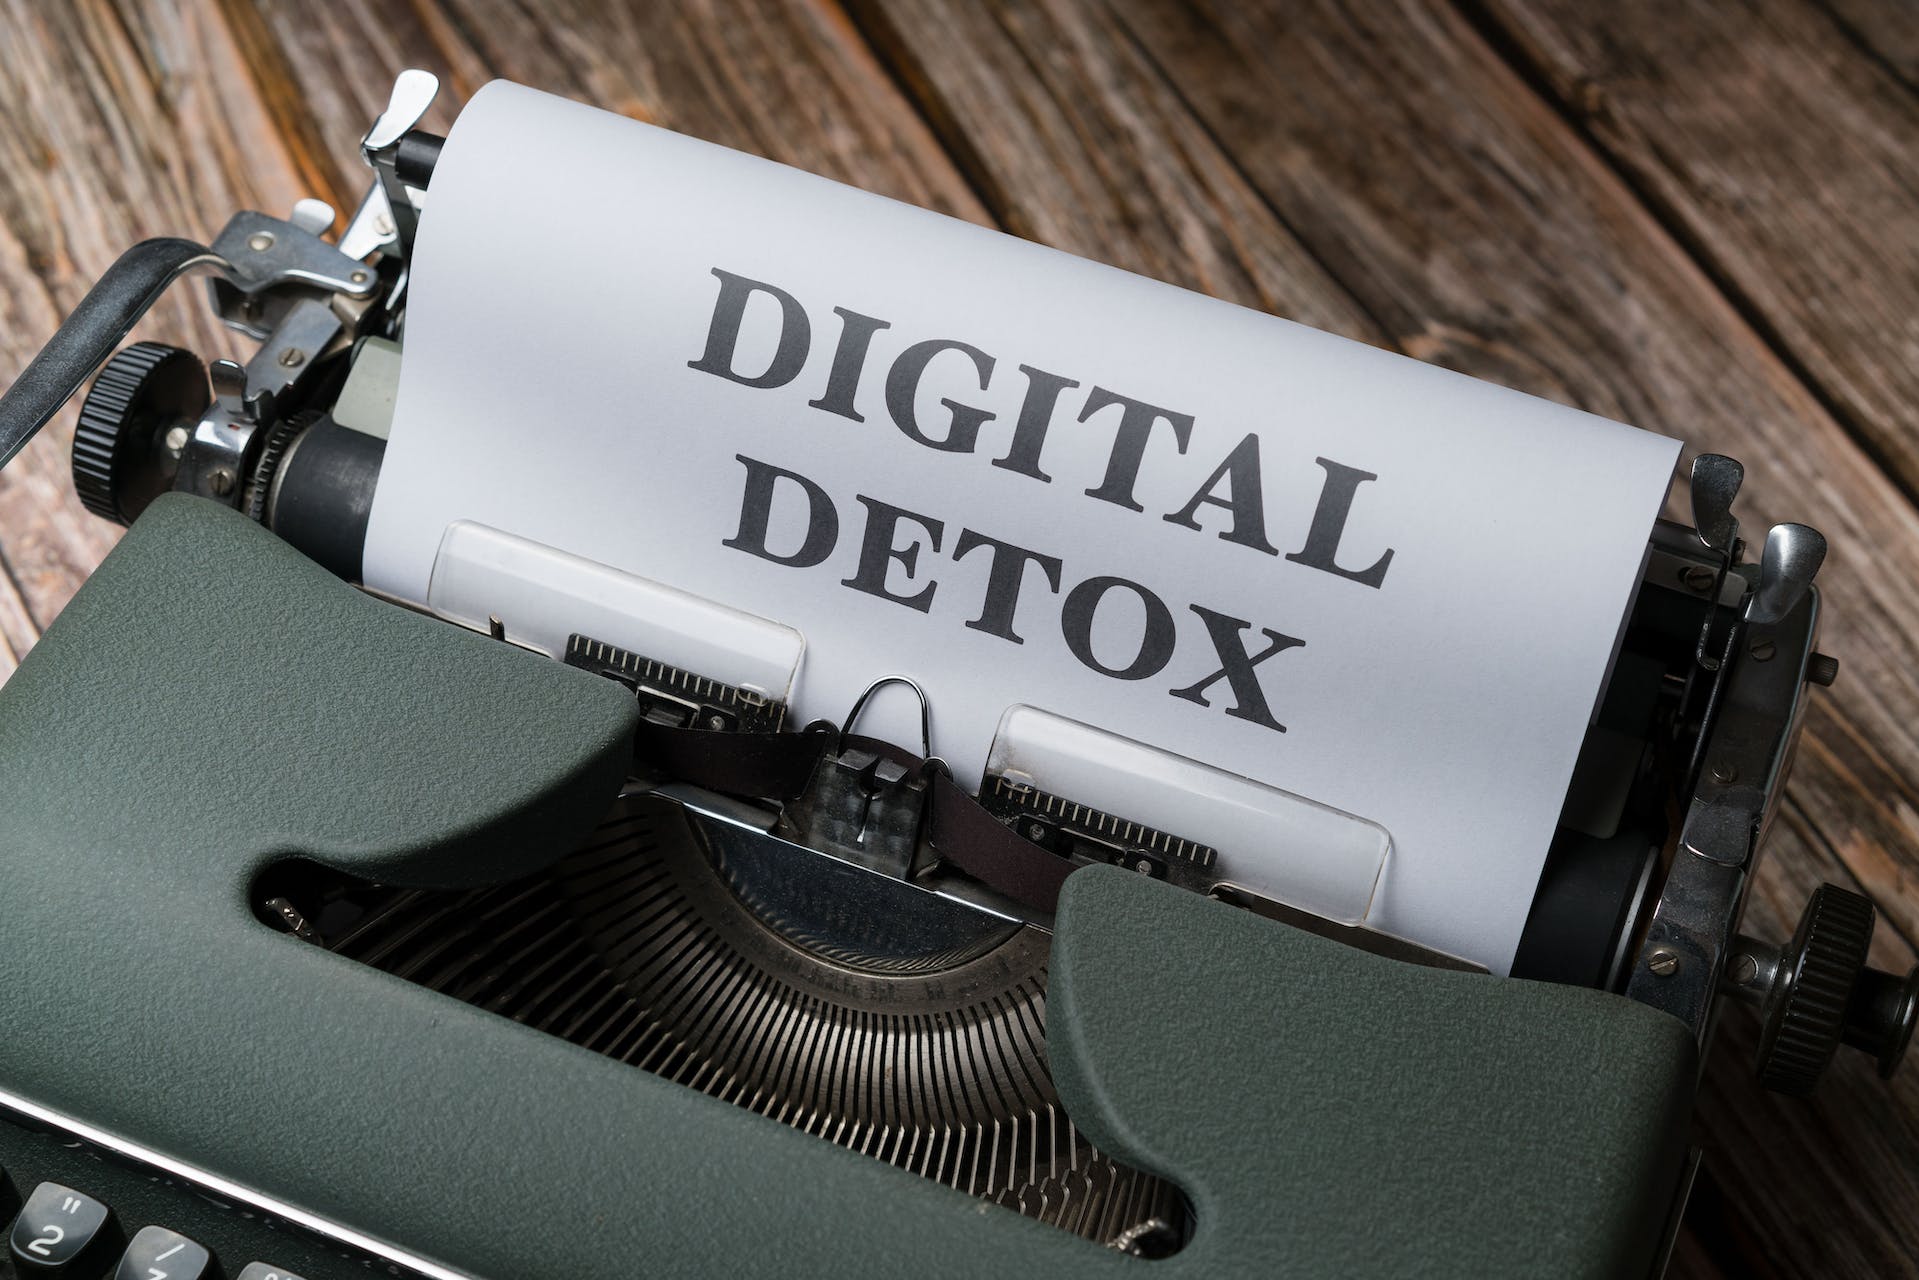 A classic typewriter on a wooden background, with a paper prominently displaying the words 'DIGITAL DETOX' in uppercase letters. This image symbolizes the concept of 'Managing Mental Health with Social Media' by taking a step back from digital platforms for mental well-being.